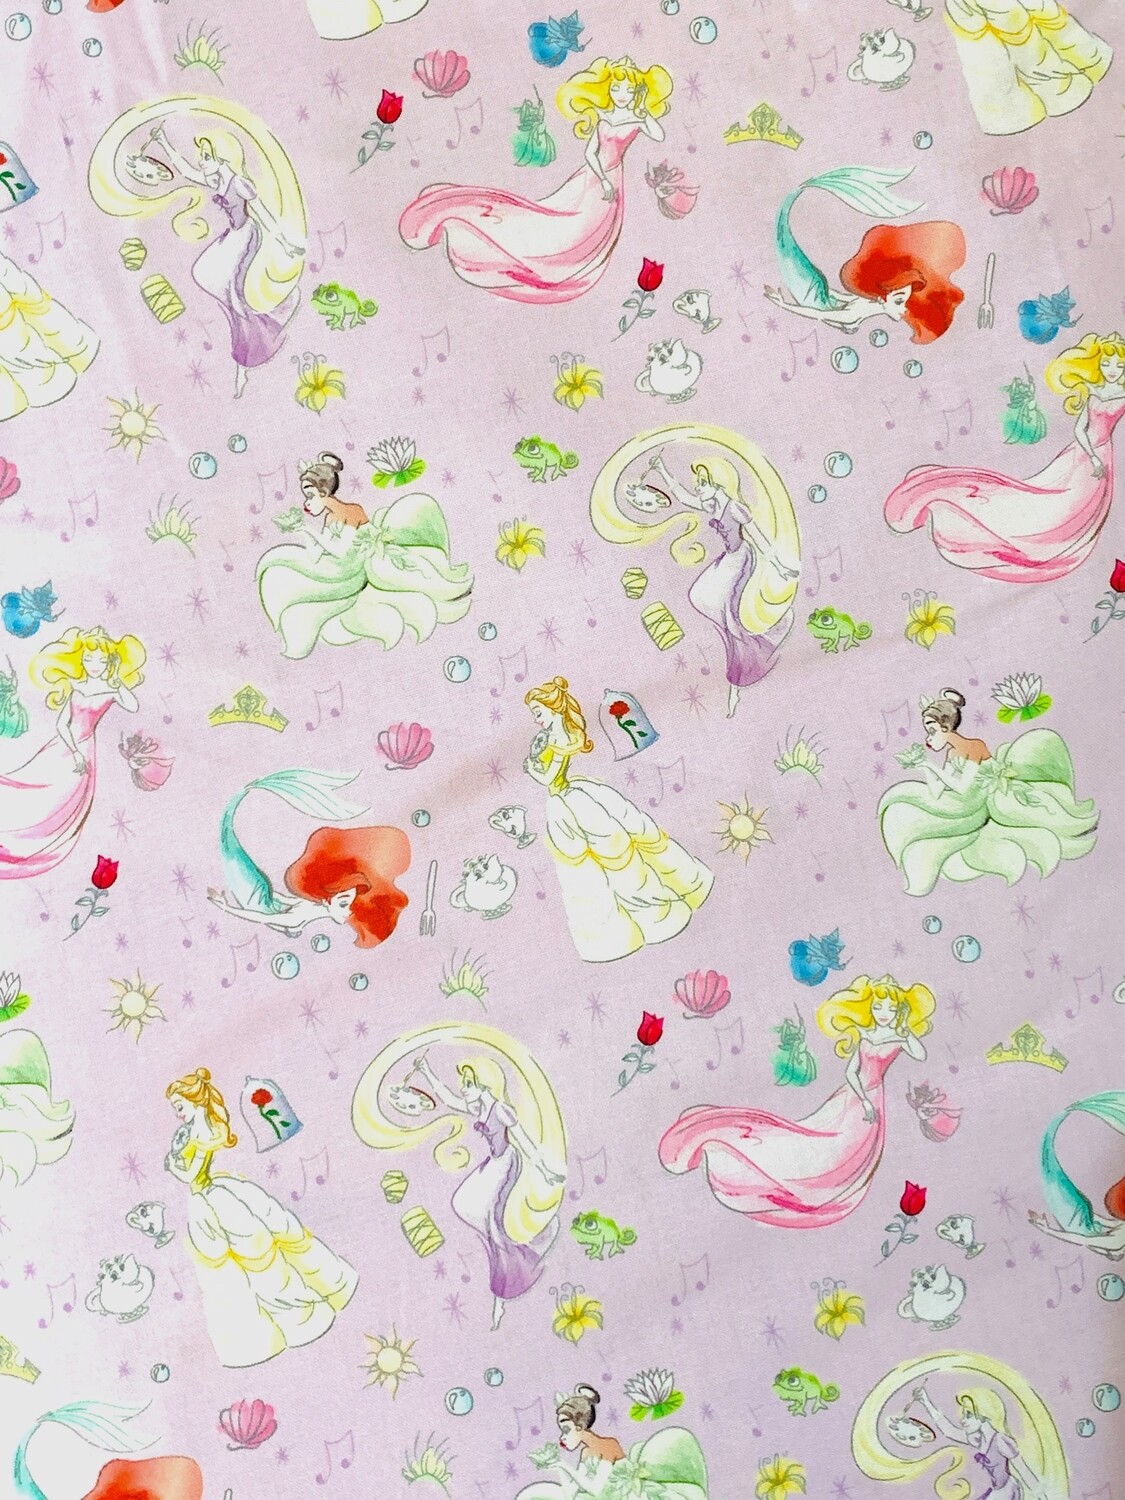 Dreamy Princesses Toss | Licensed Quilting Cotton | 112cm wide